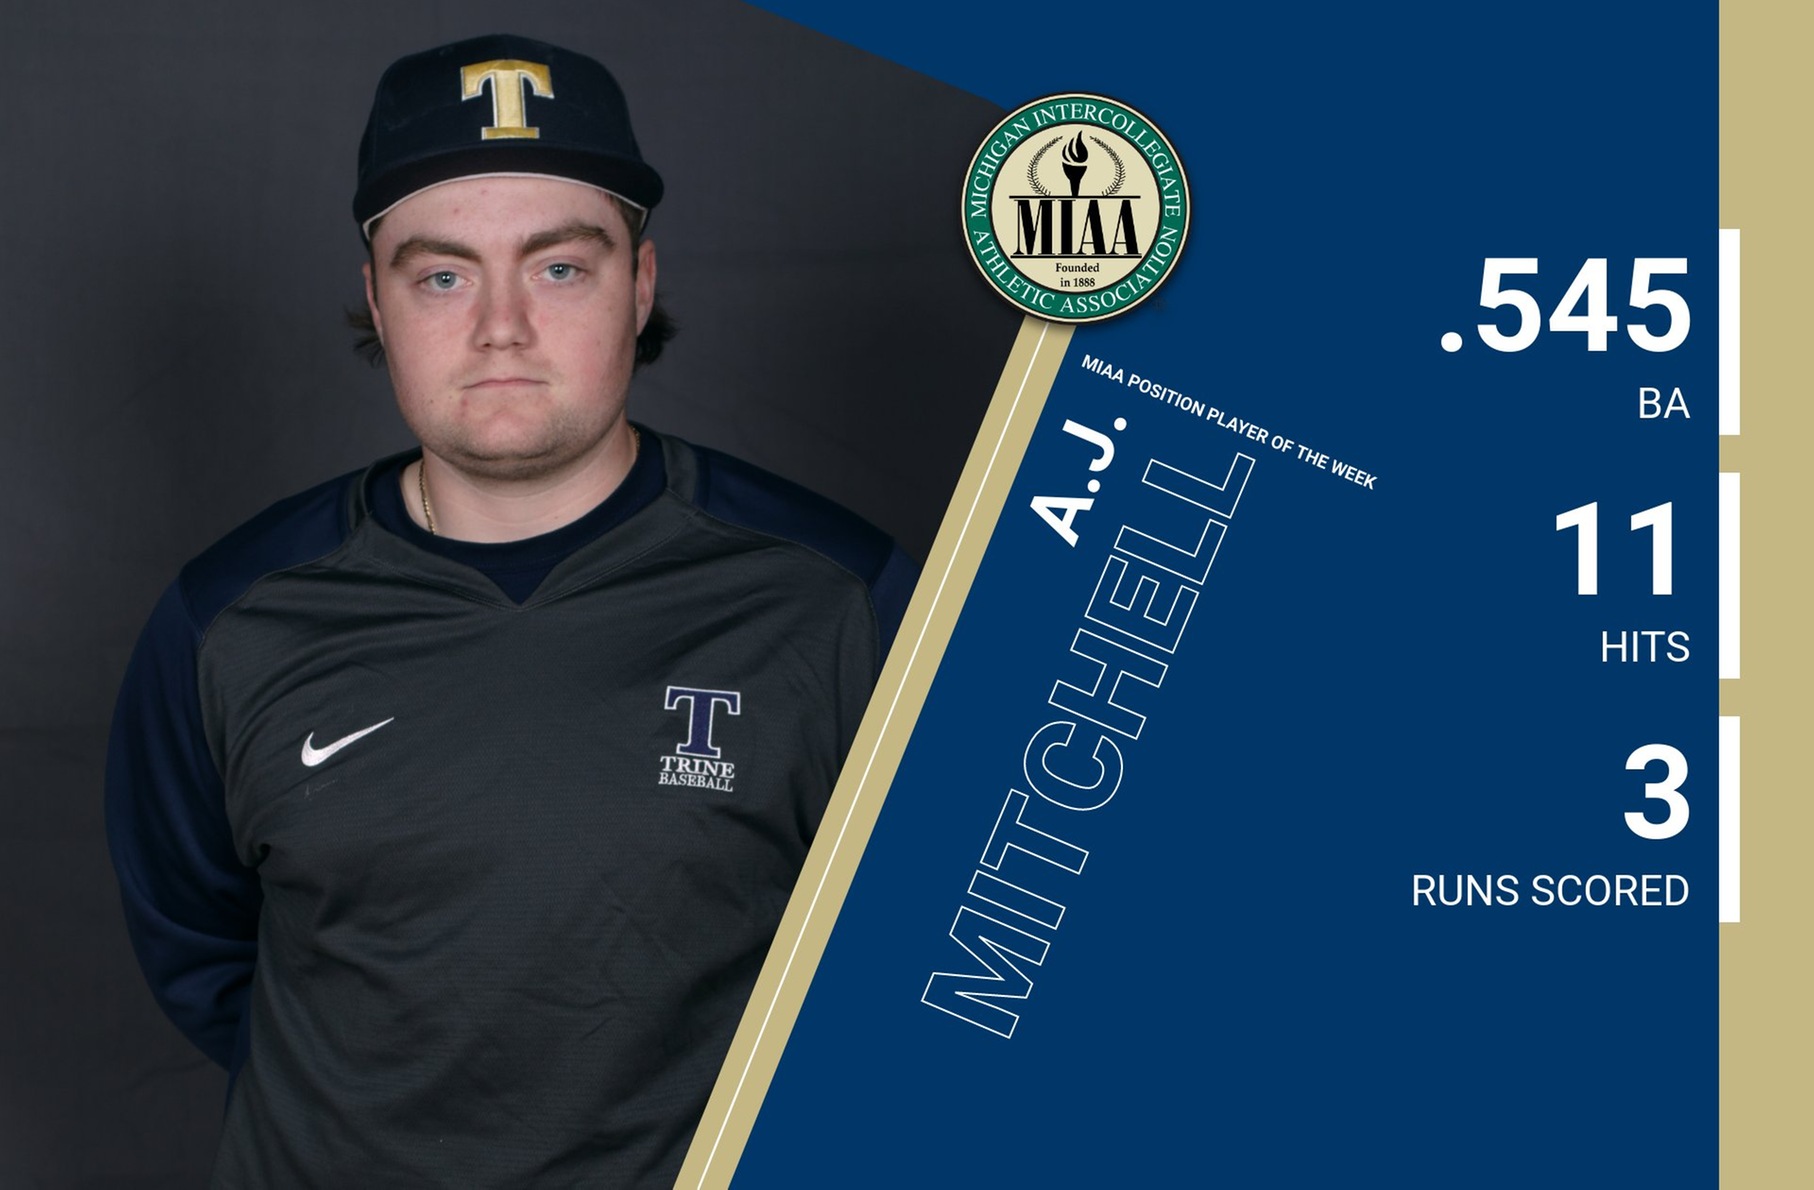 Mitchell Named MIAA Player of the Week